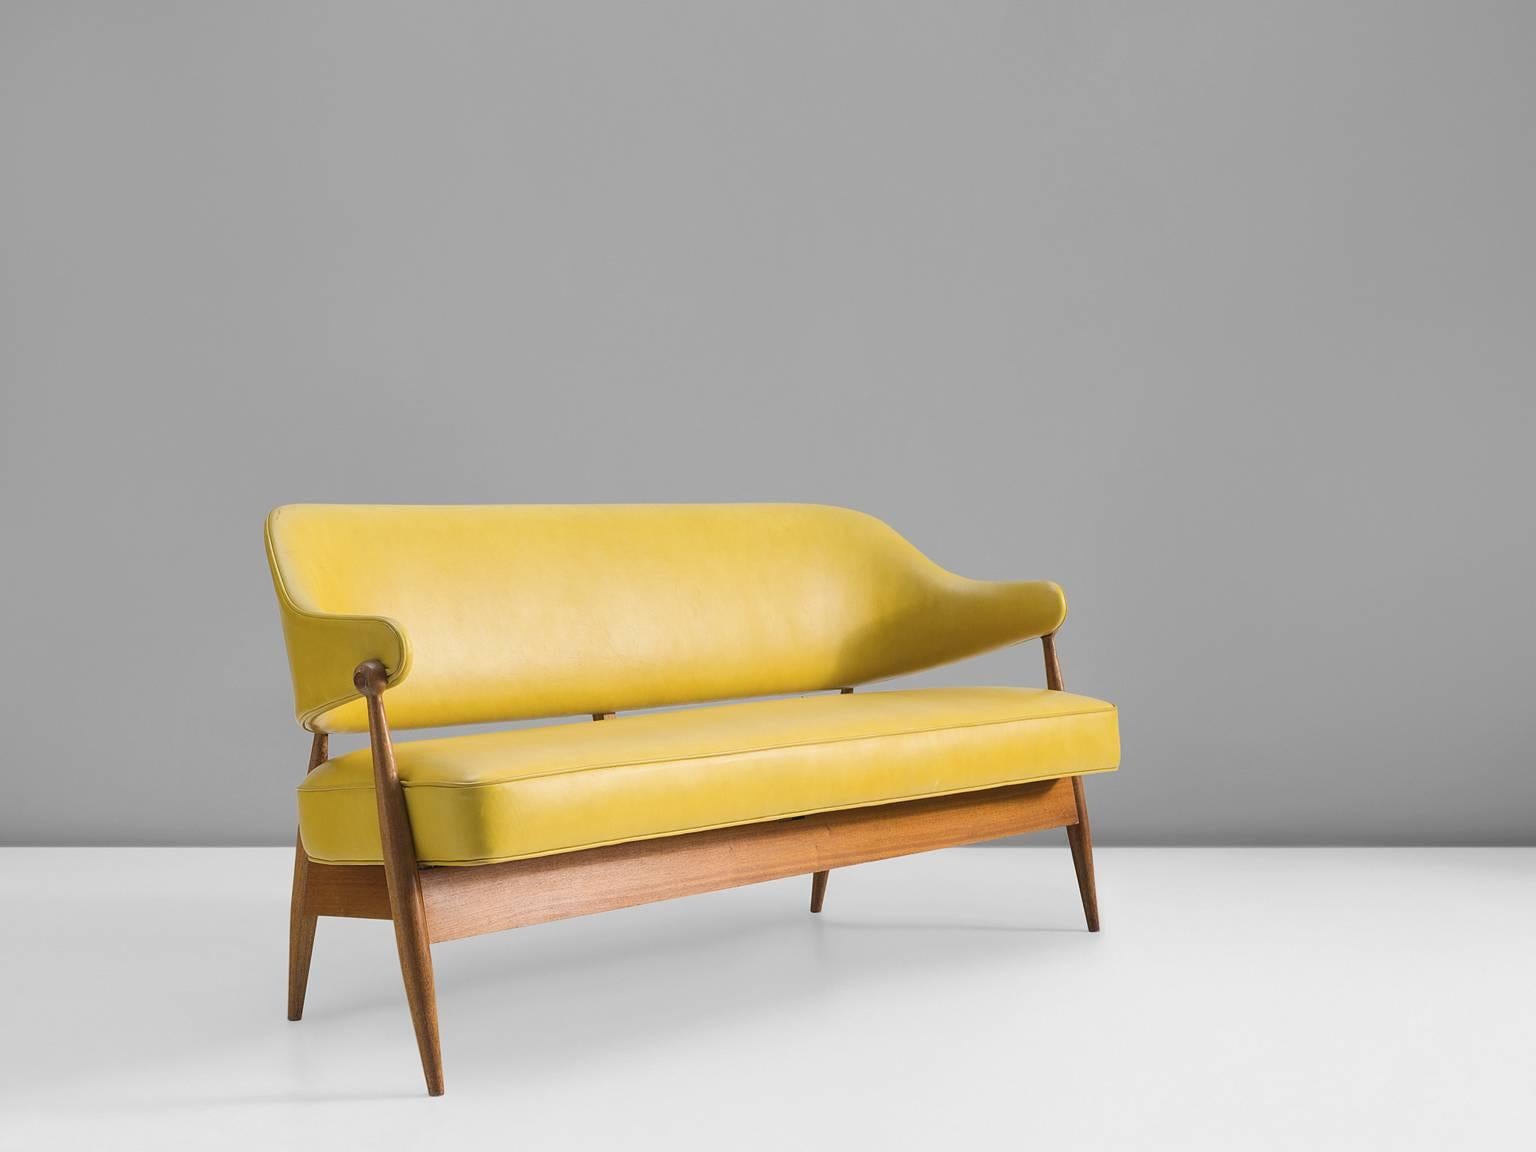 Sofa, yellow ohmann leather and teak, Denmark, 1950s

This Danish sofa features a tilted backrest that is connected to the seat by means of little teak beams. The legs of the sofa are thick and tapered towards both ends. The backrest flows fluently